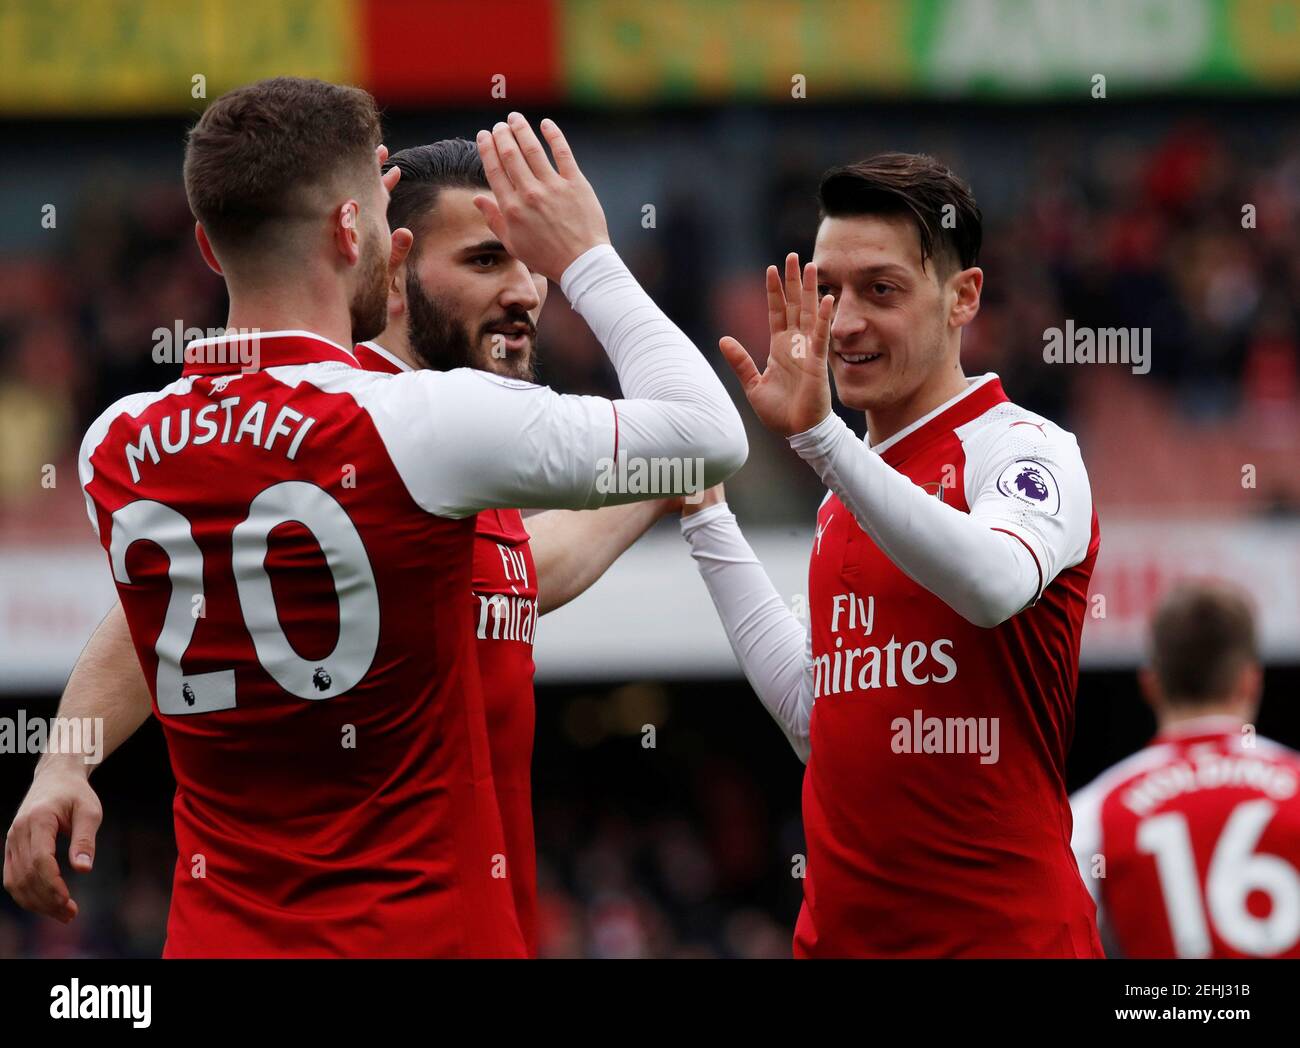 Soccer Football - Premier League - Arsenal vs Watford - Emirates Stadium, London, Britain - March 11, 2018   Arsenal's Shkodran Mustafi celebrates scoring their first goal with team mates         REUTERS/Eddie Keogh    EDITORIAL USE ONLY. No use with unauthorized audio, video, data, fixture lists, club/league logos or "live" services. Online in-match use limited to 75 images, no video emulation. No use in betting, games or single club/league/player publications.  Please contact your account representative for further details. Stock Photo